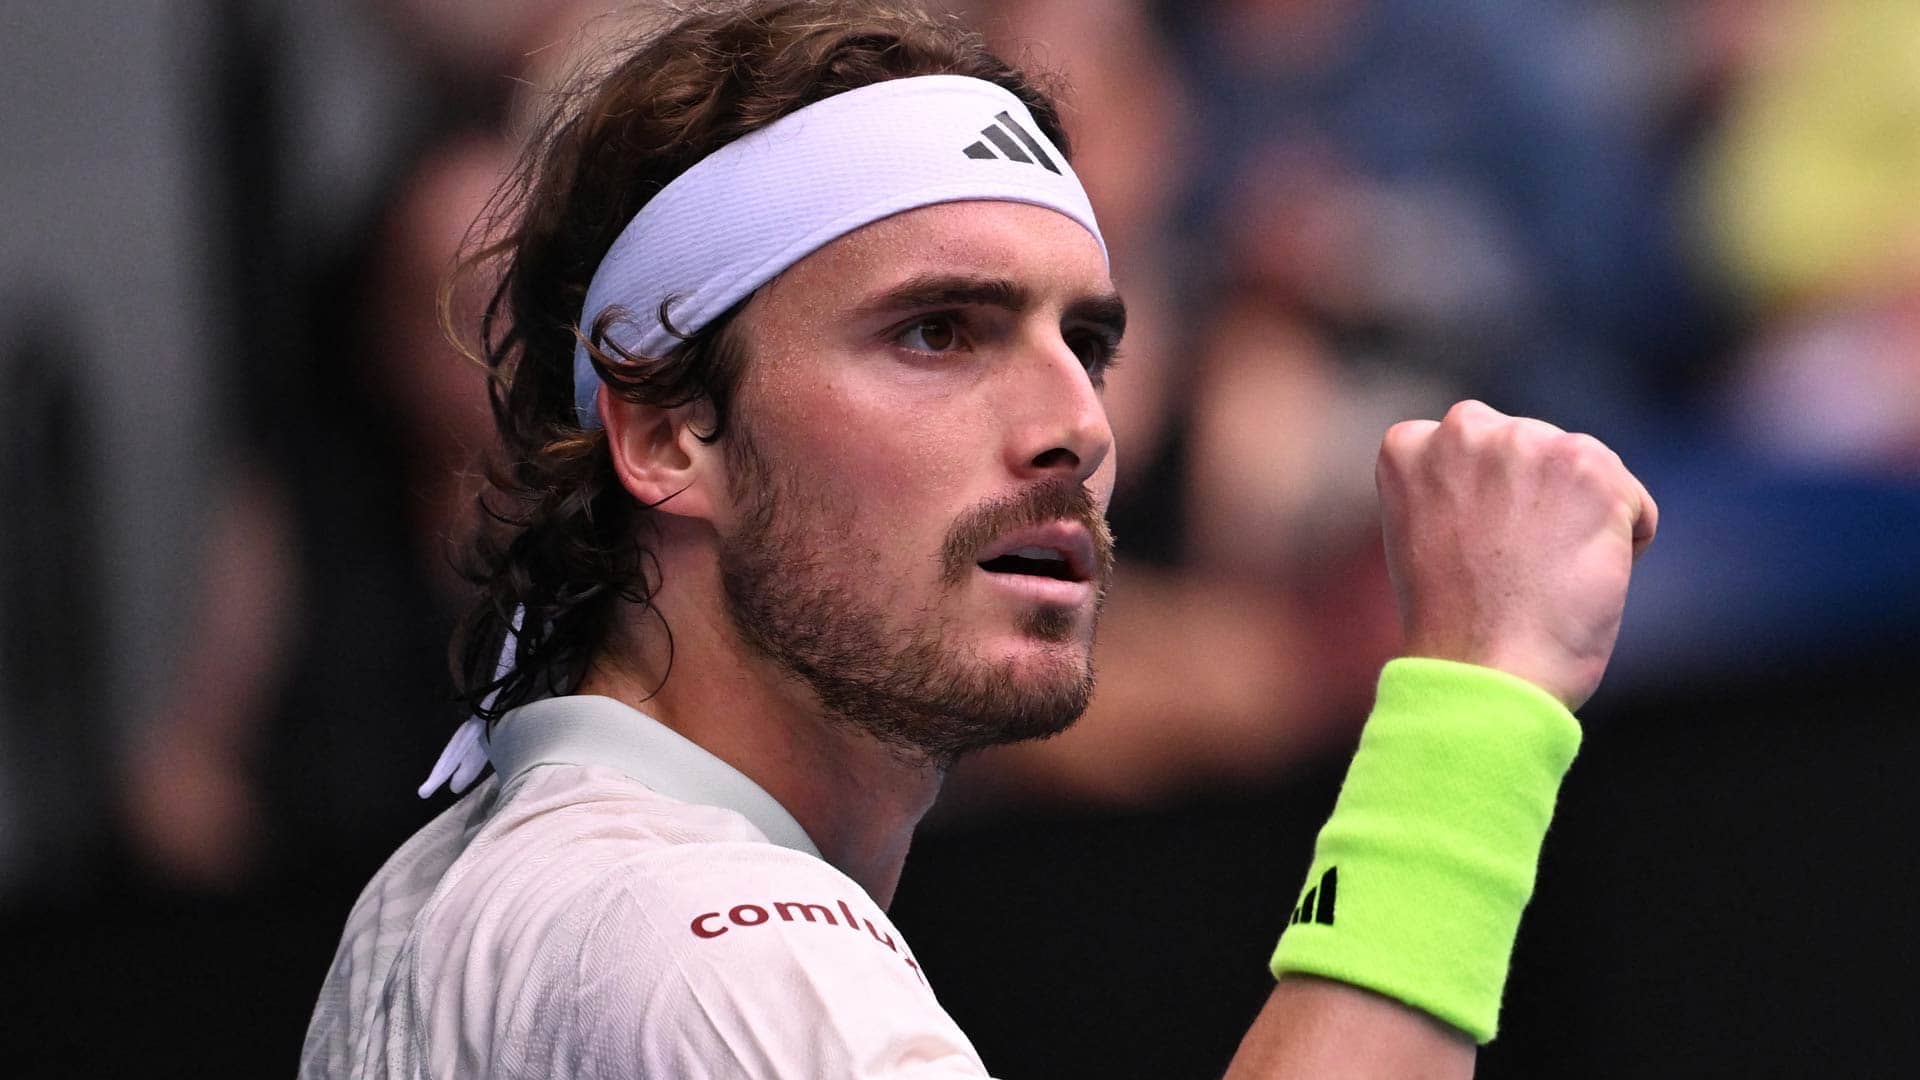 Stefanos Tsitsipas is bidding to return to the Australian Open final for the second consecutive year.